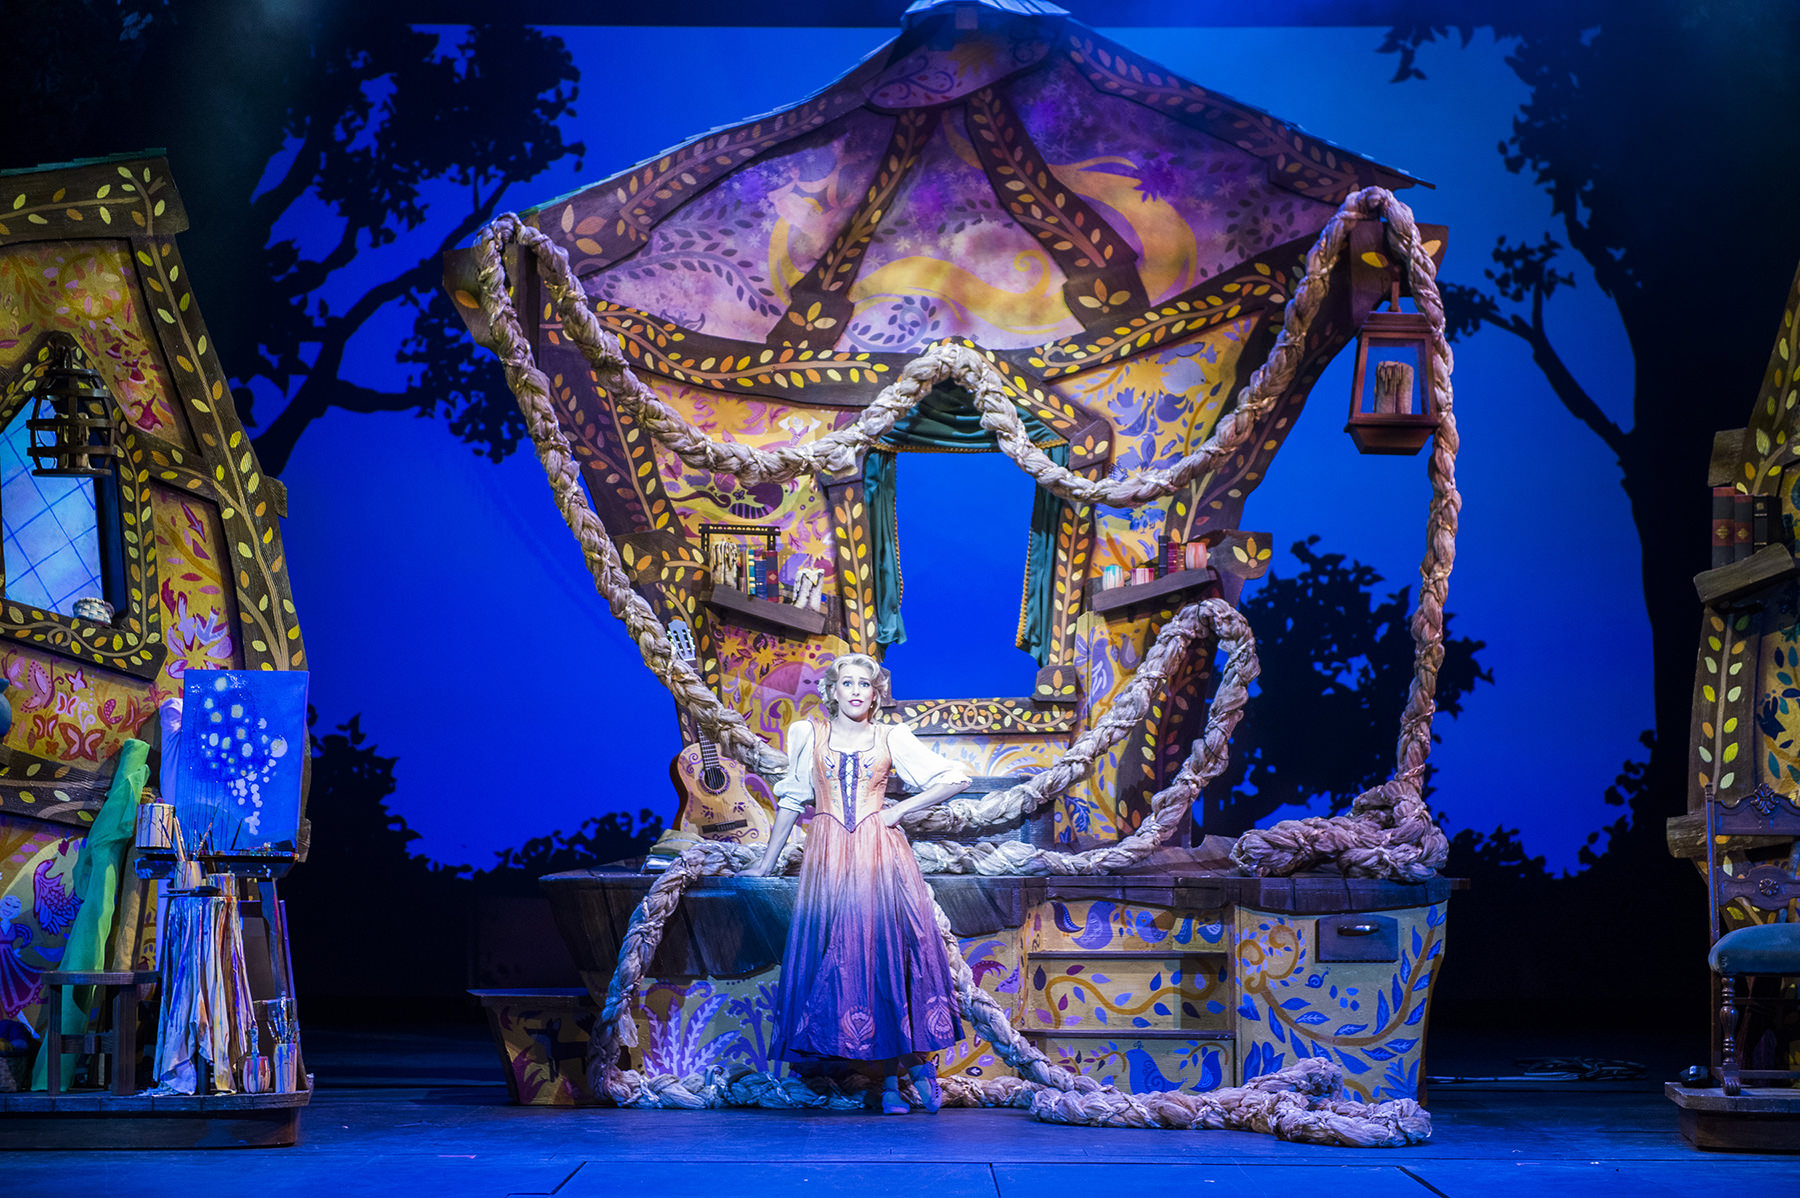 “Tangled: The Musical” Aboard the Disney Magic